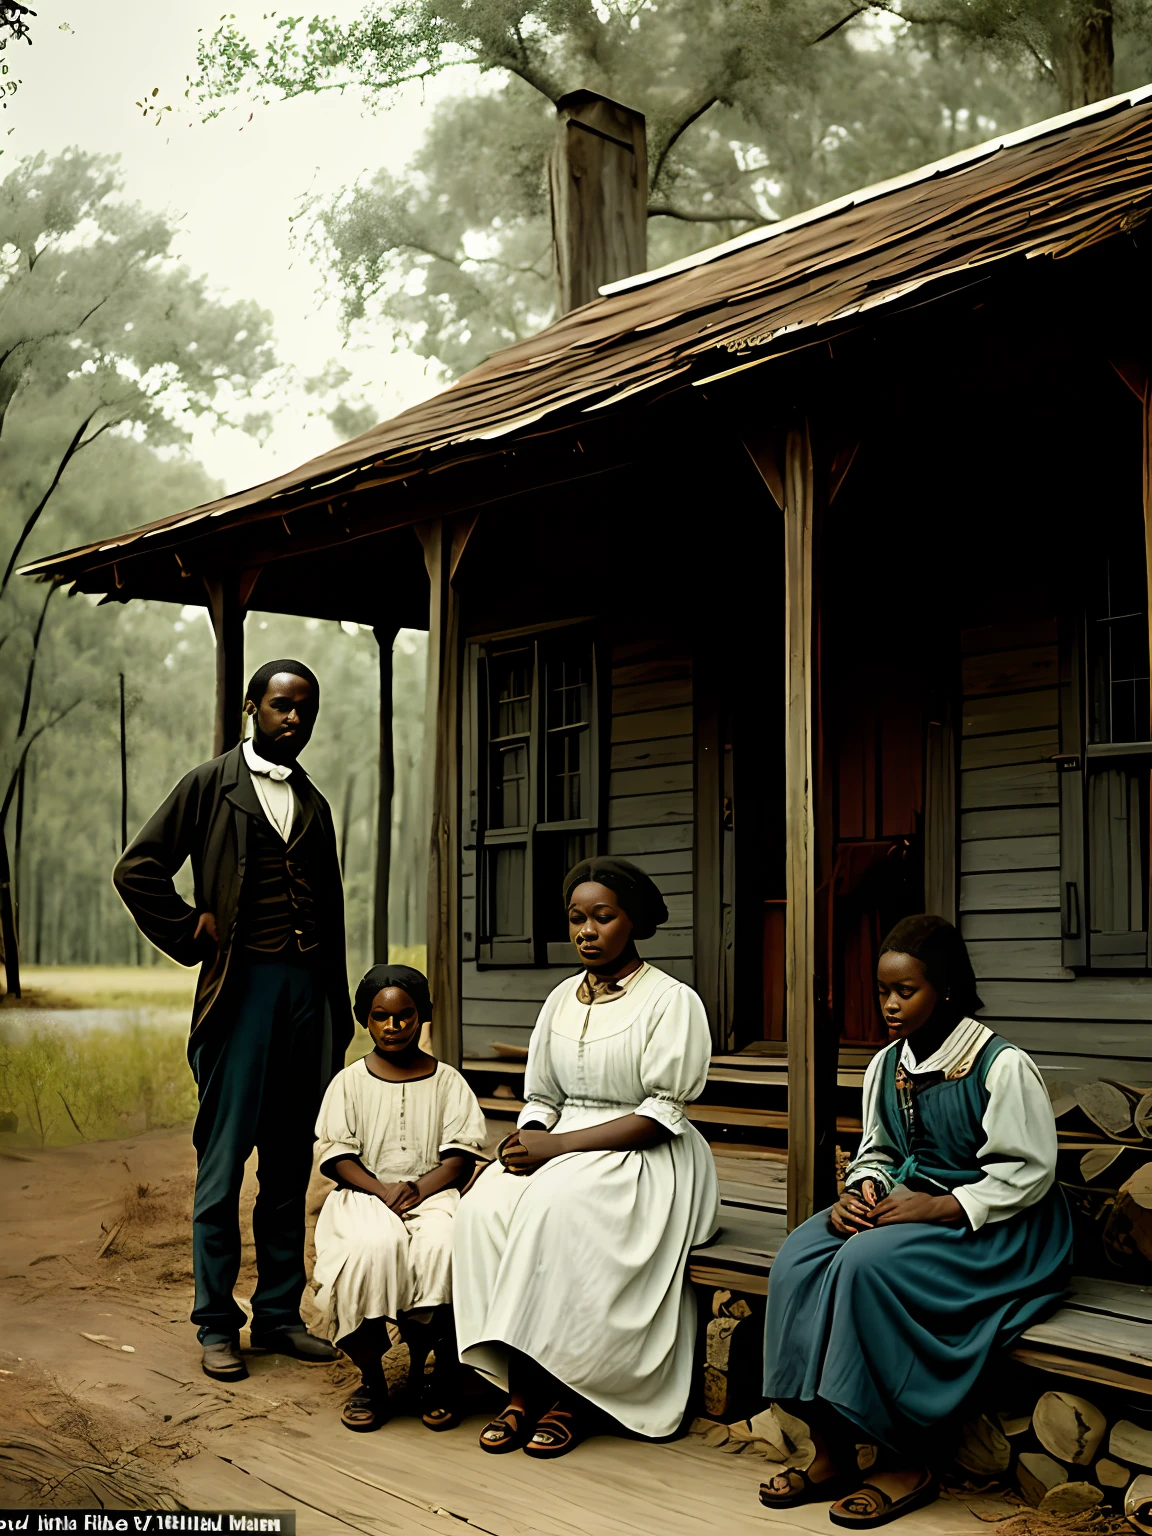 poor escaped slave family sitting on a porch in the great dismal swamp, swamp, documentary film quality, slight motion blur, film still, 19th century